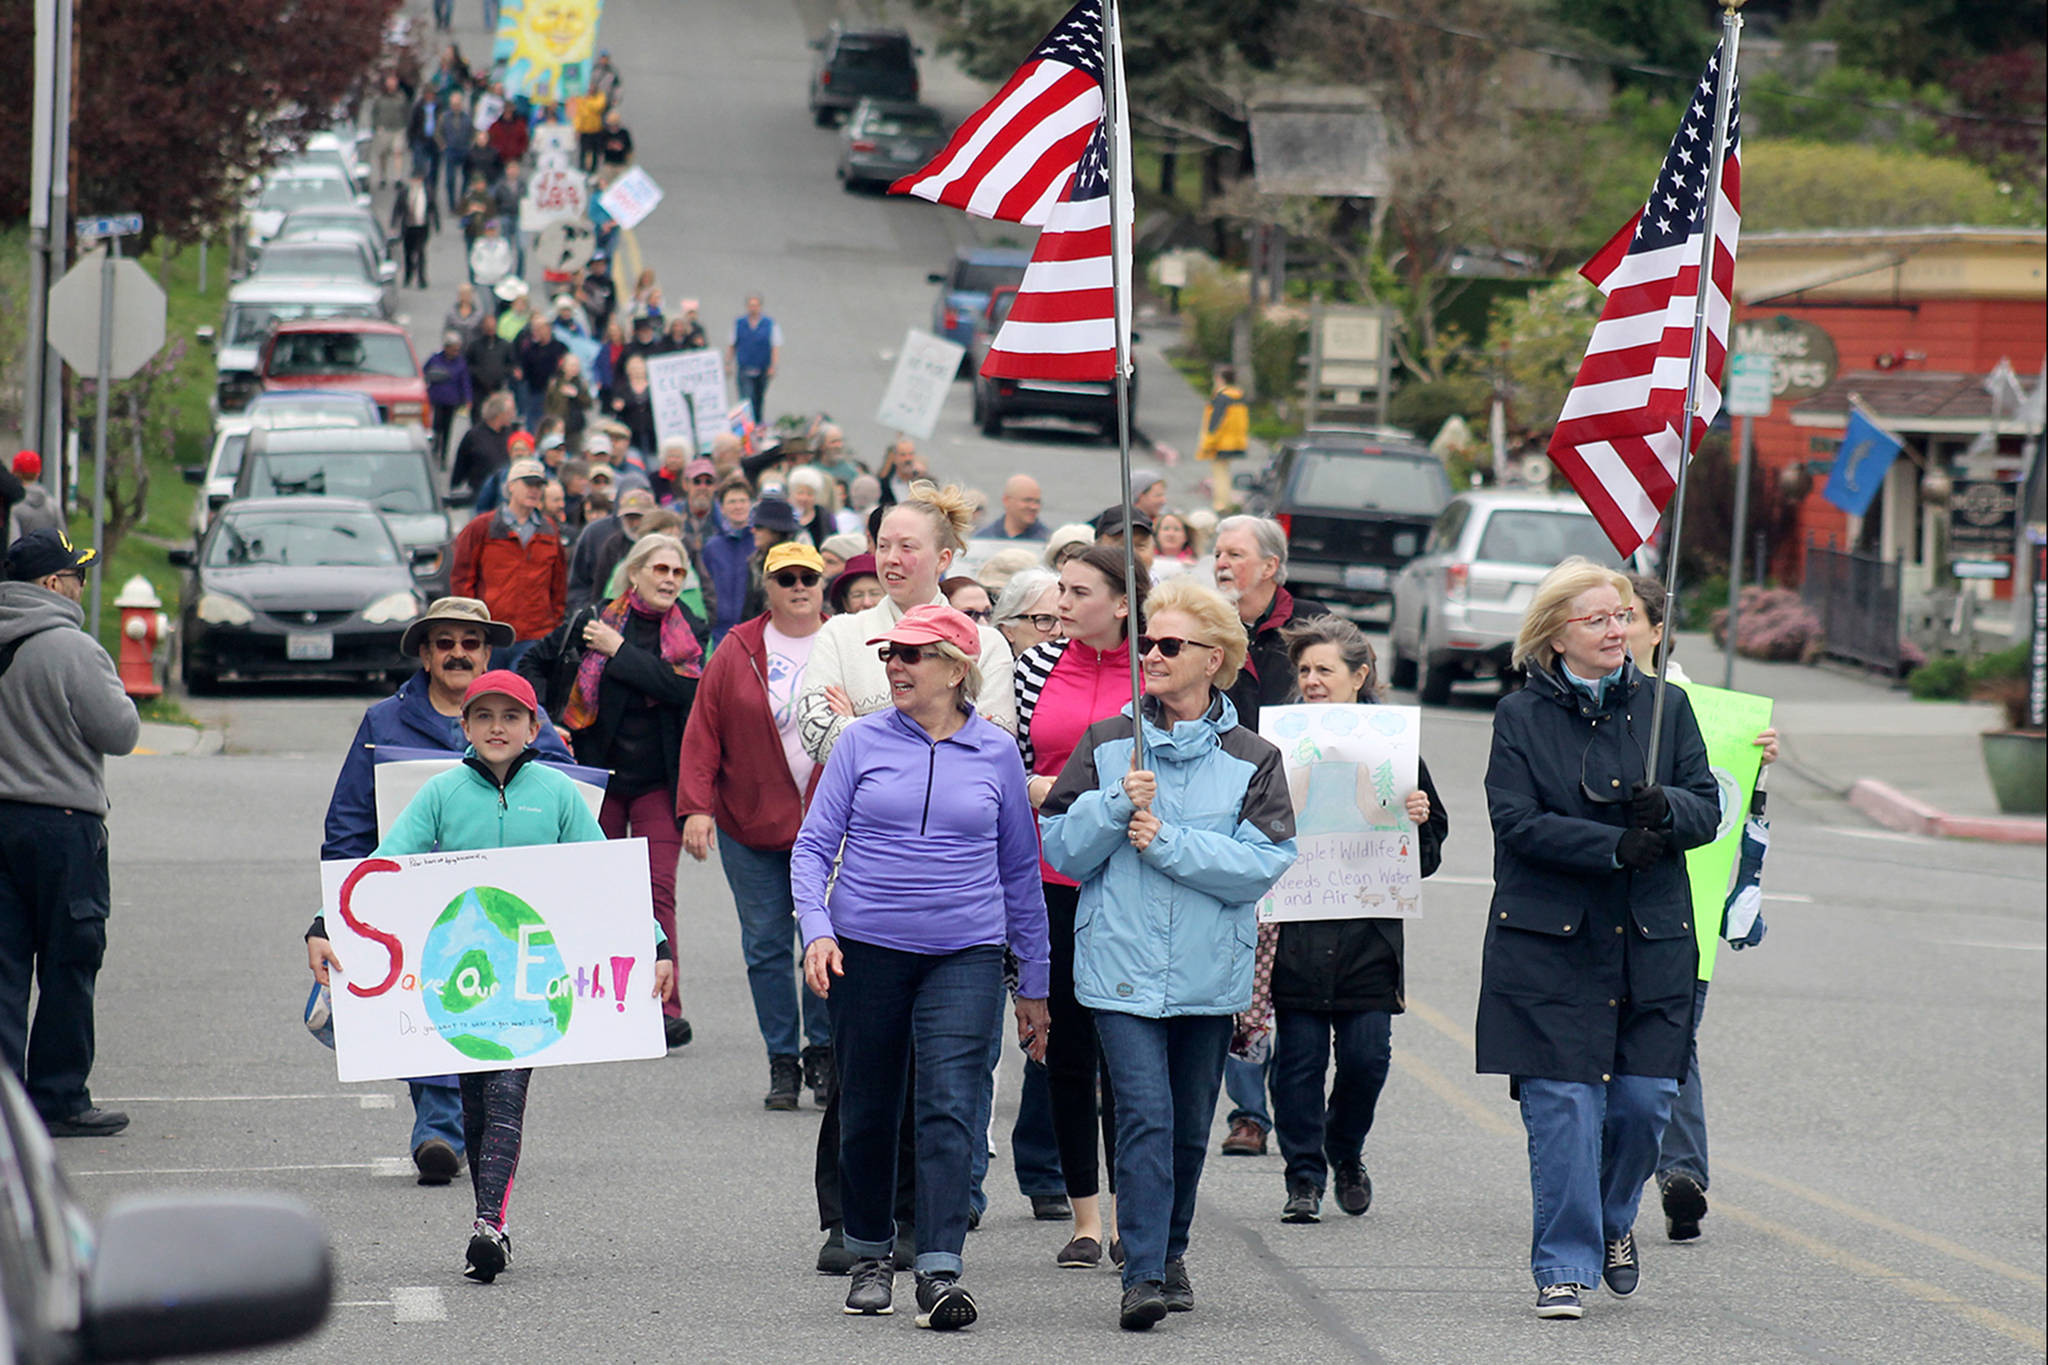 Hundreds participate in climate march through streets of Langley